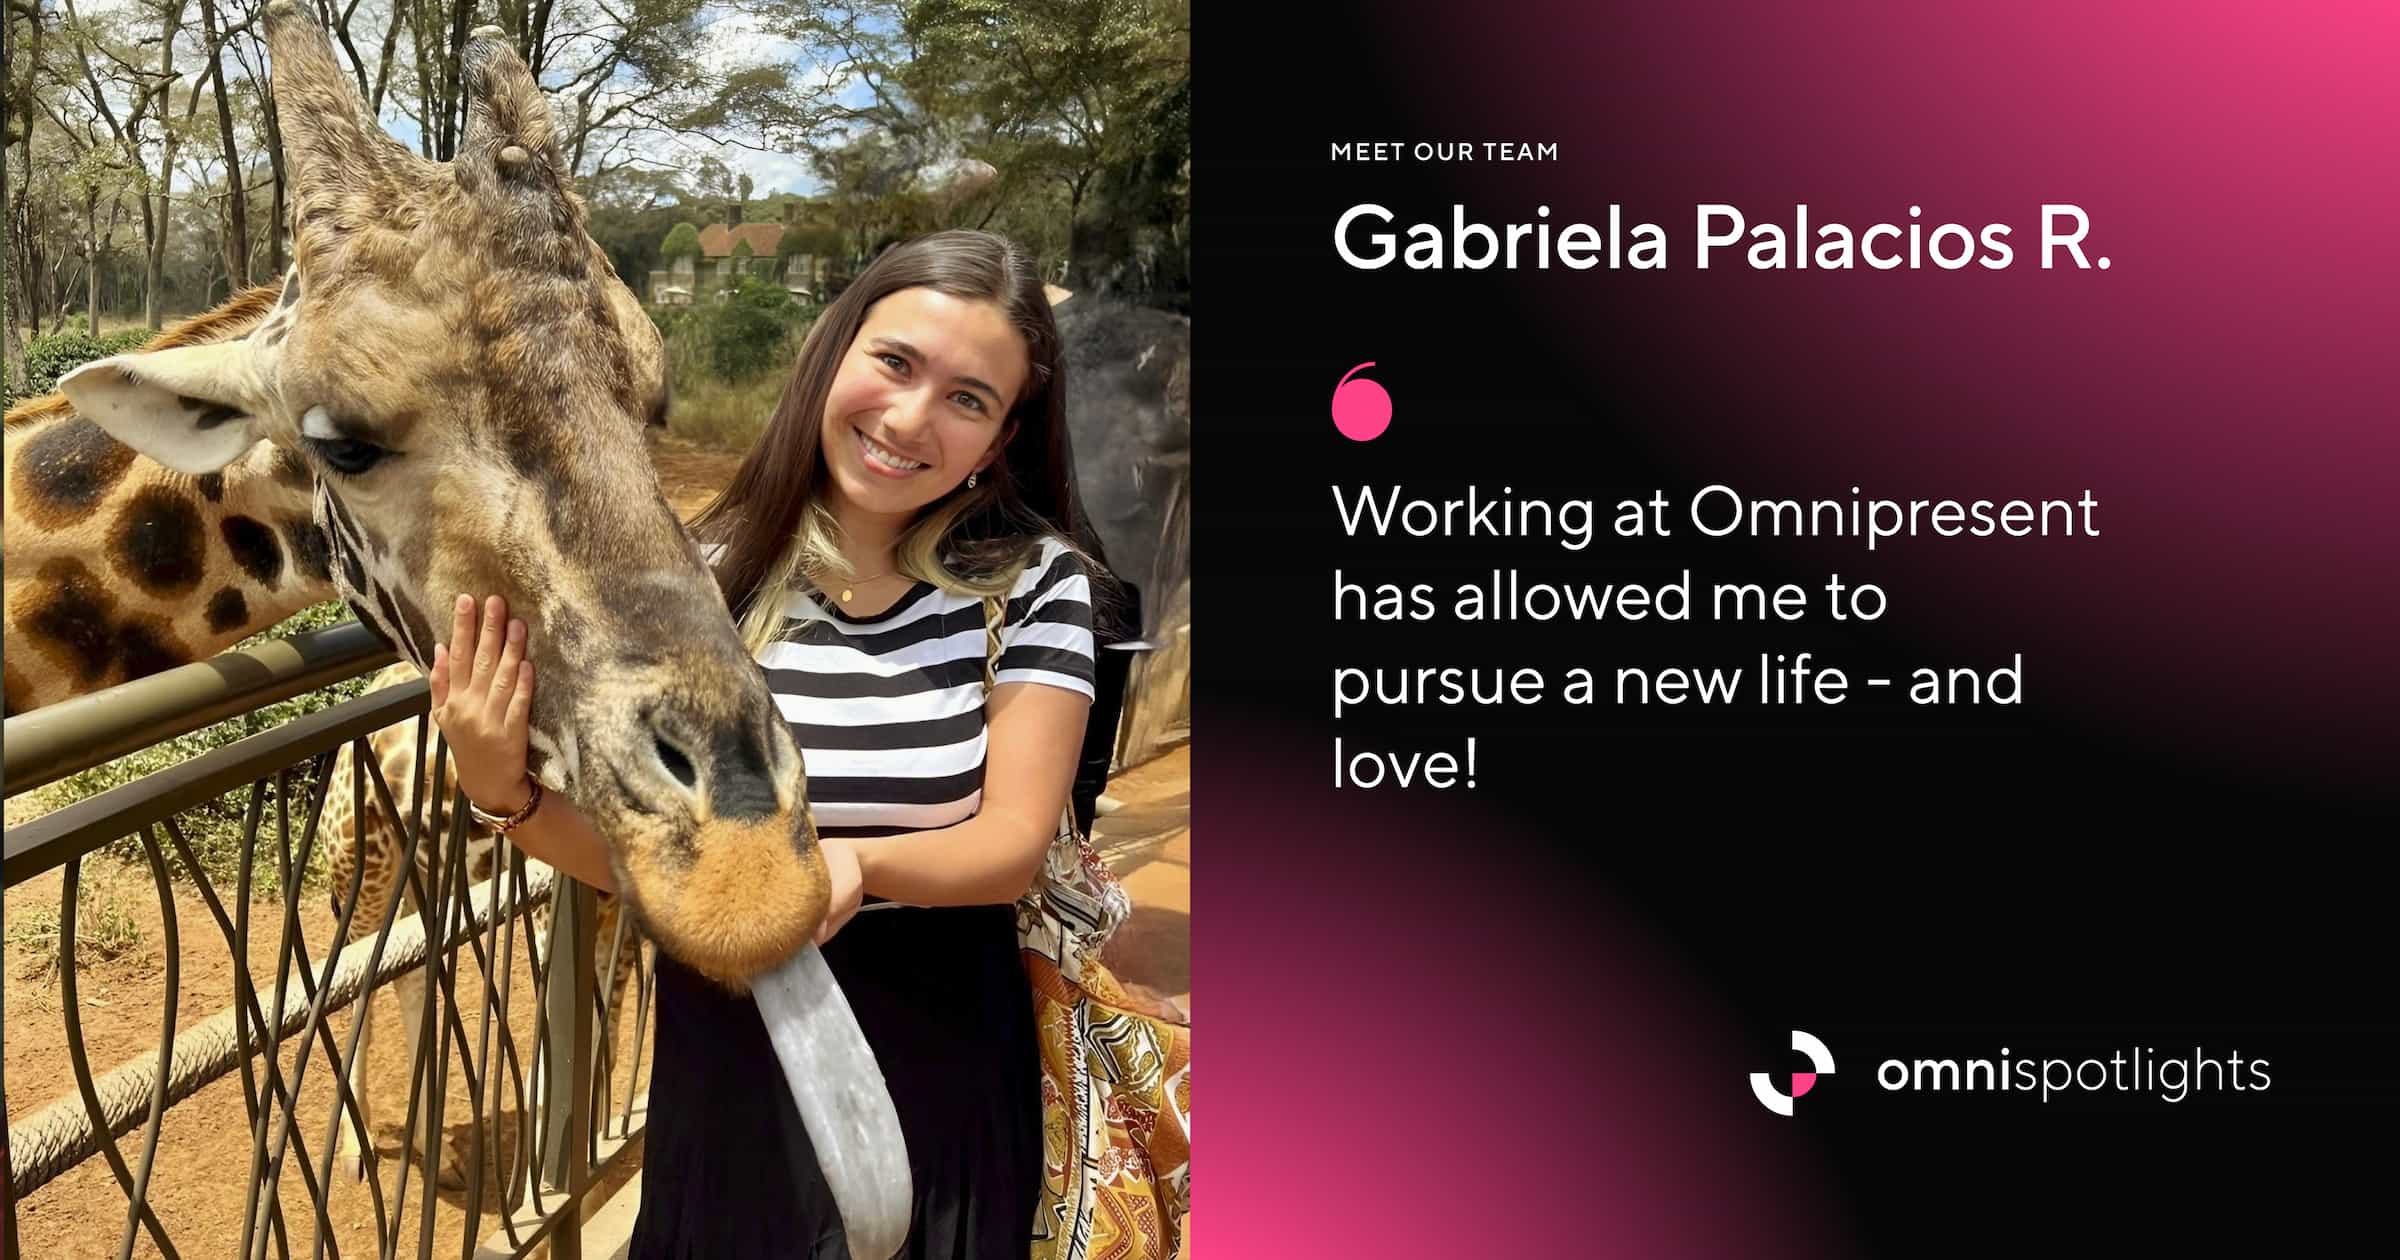 Photo of Gabriela smiling and posing next to a giraffe. Next to the photo is a quote reading “Working at Omnipresent has allowed me to pursue a new life - and love!”